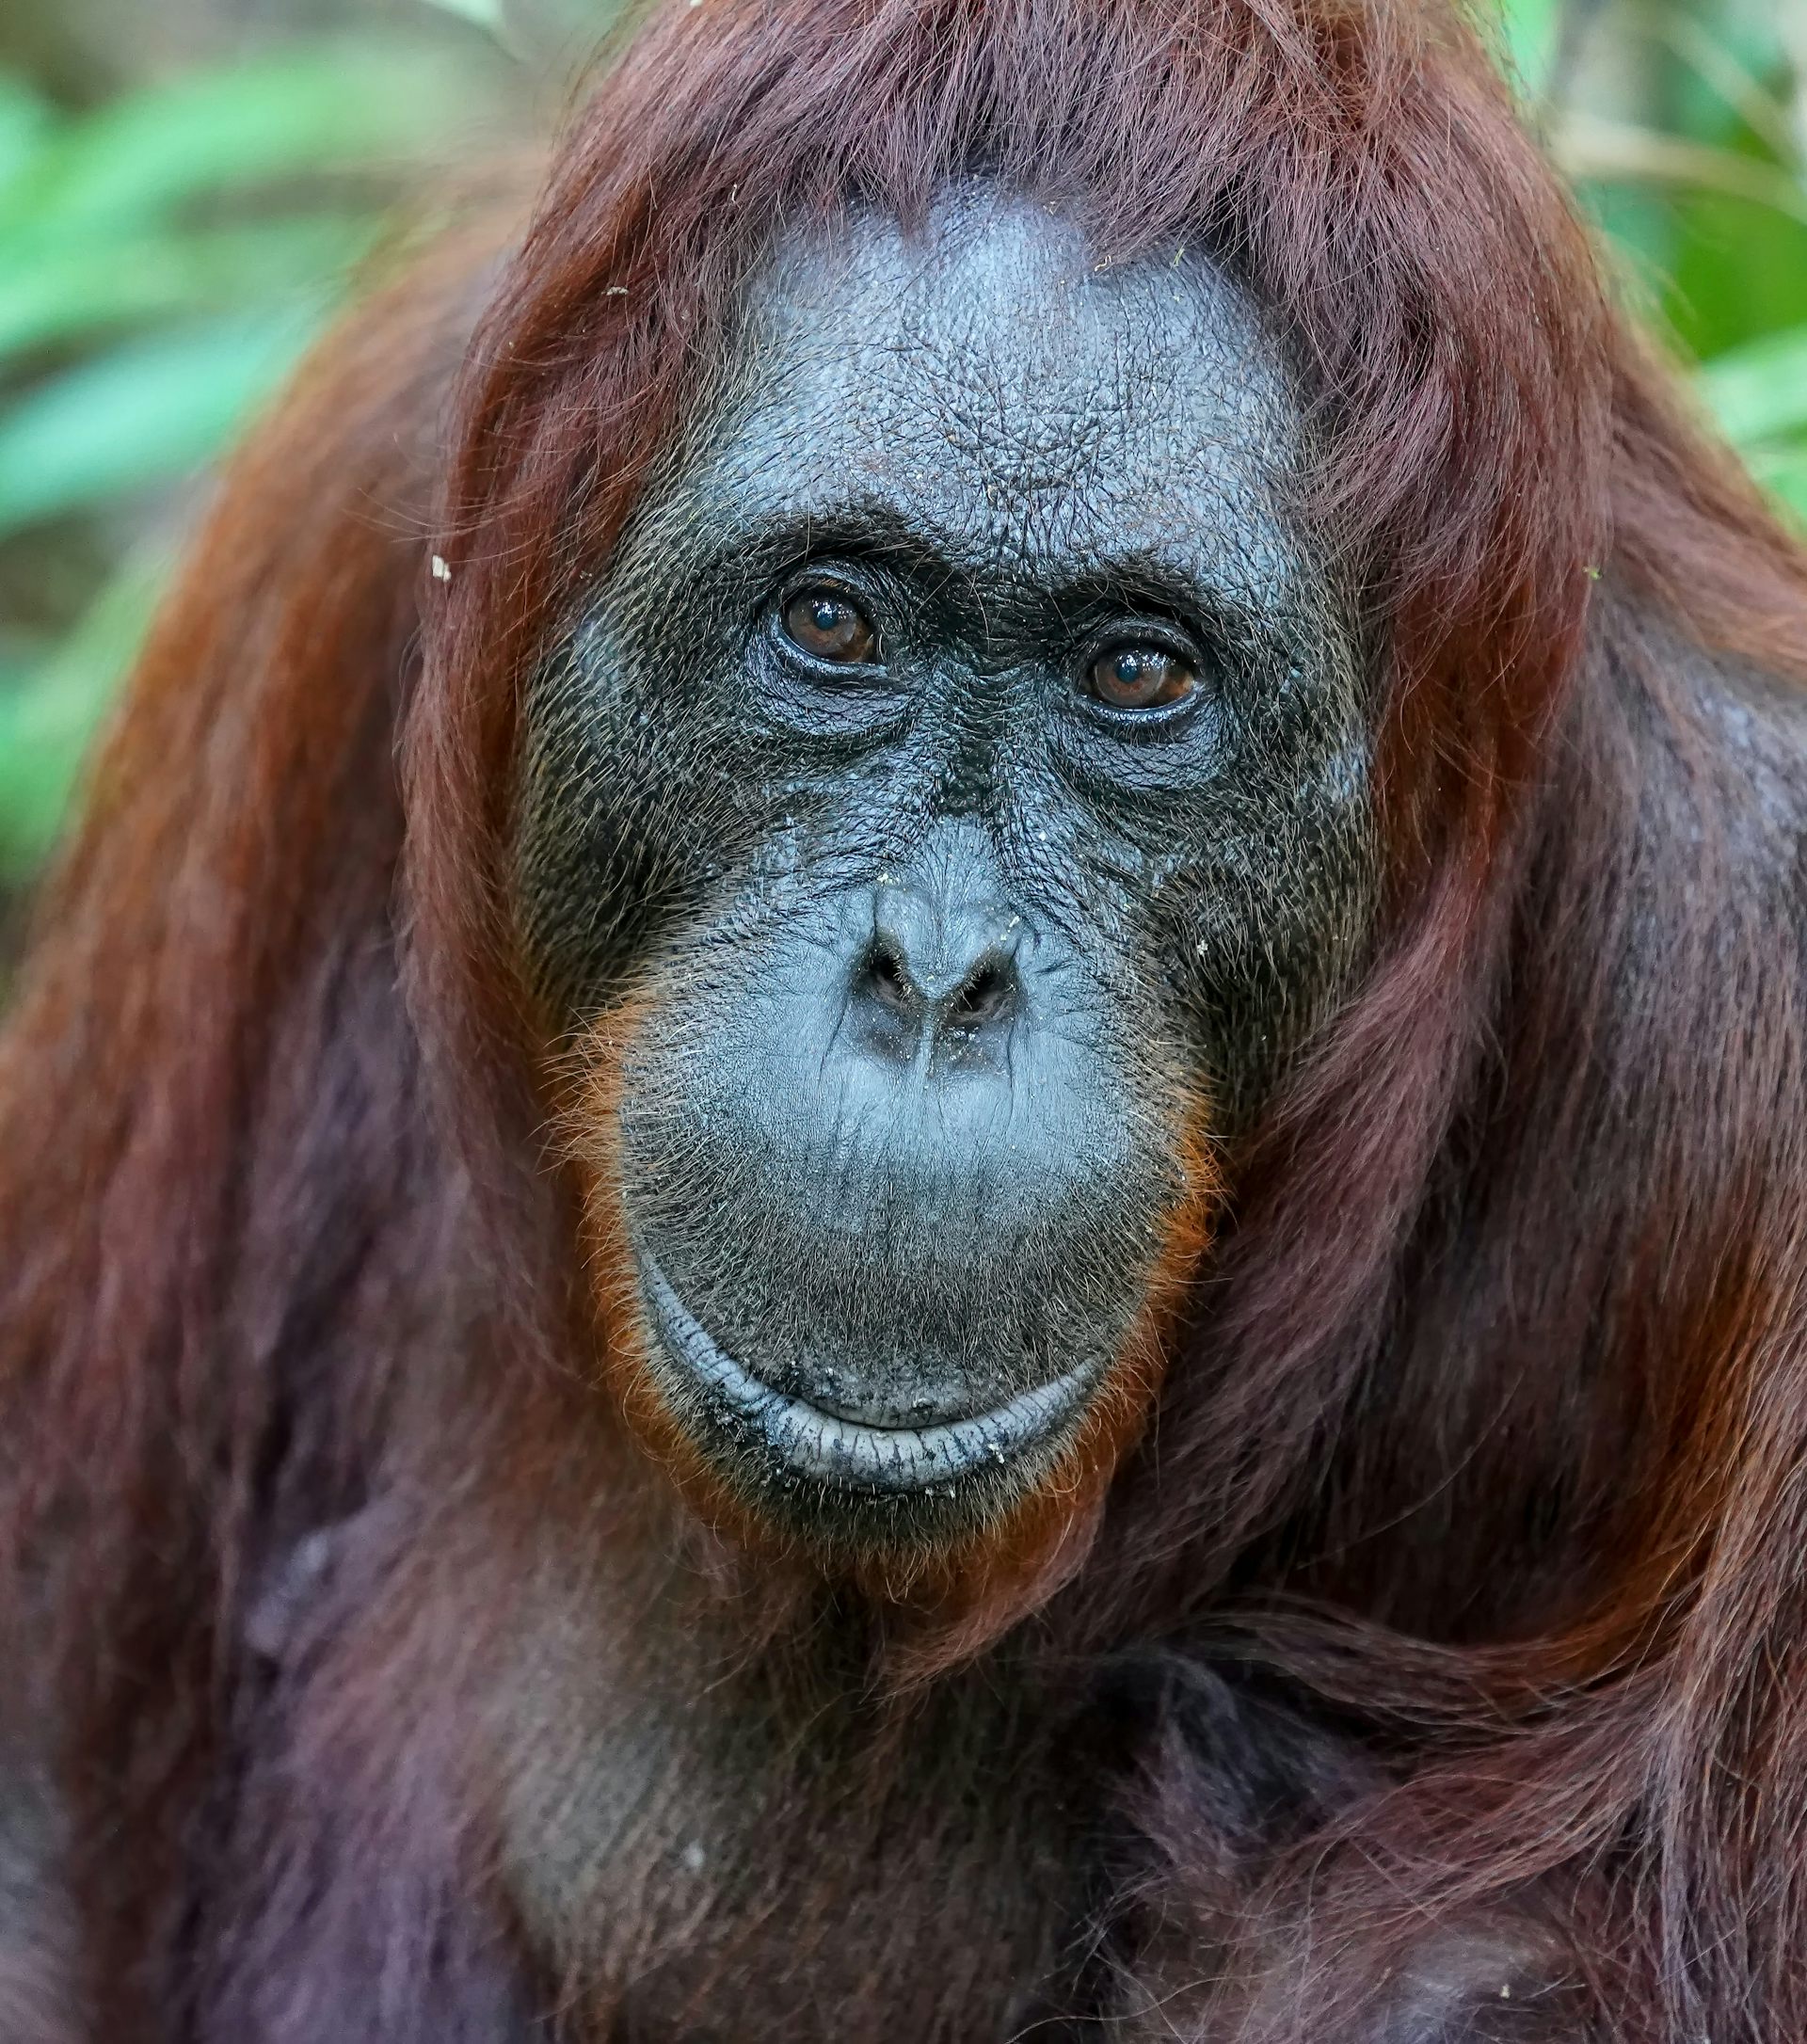 A close up of a dark faced ape with dark ginger hair, black eyes and a round muzzle